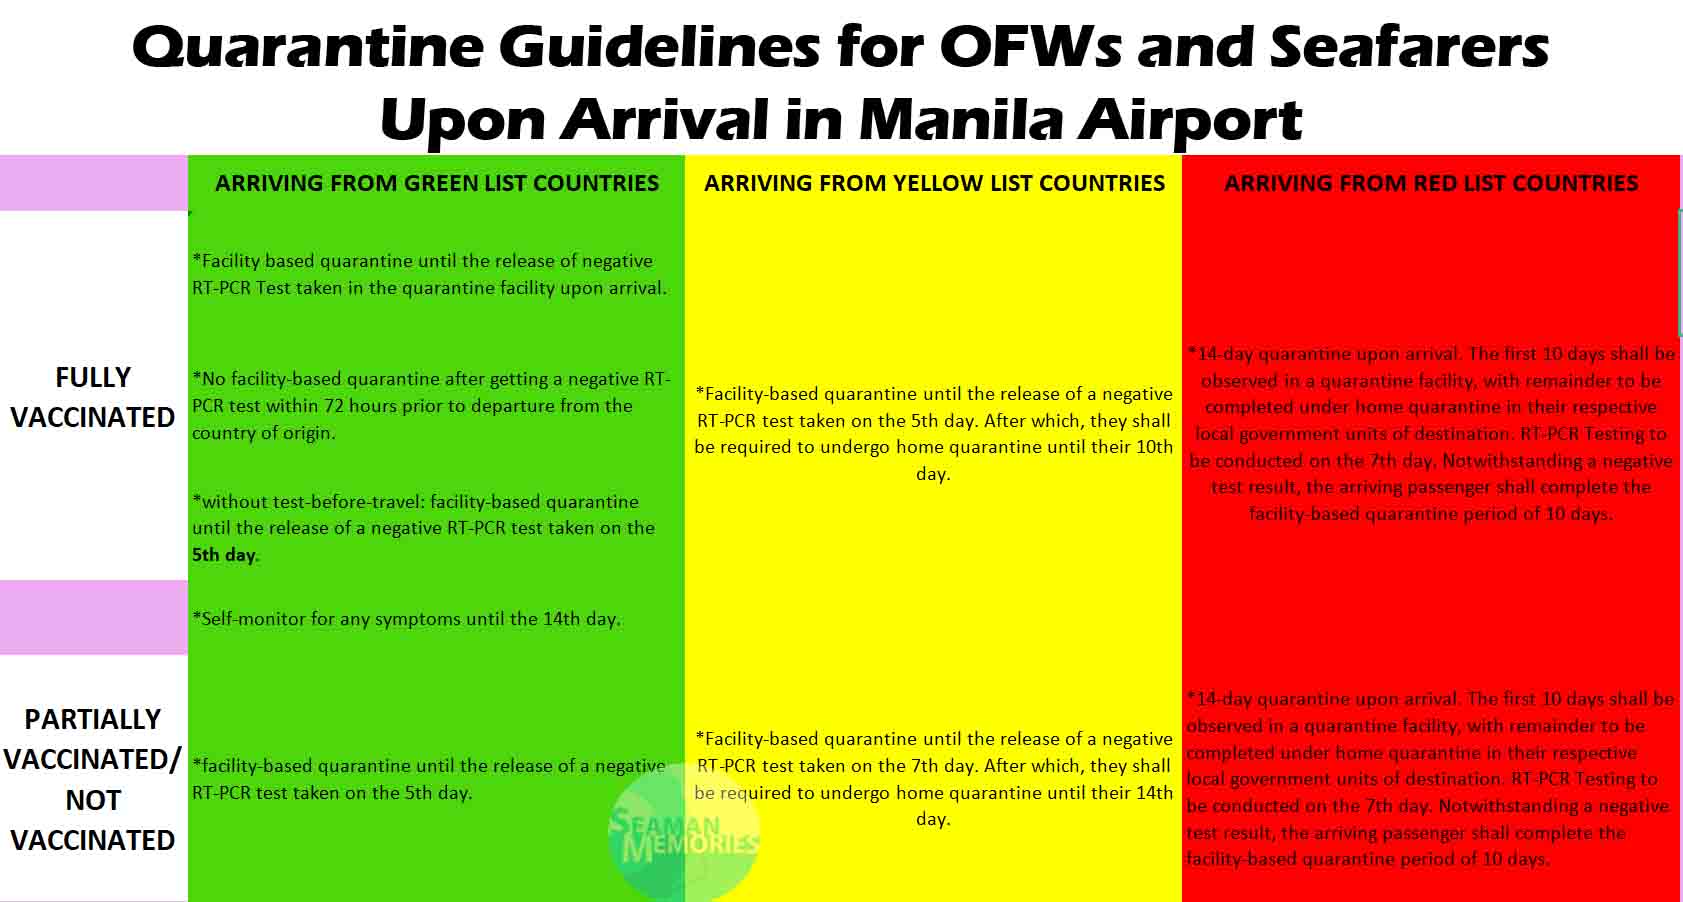 In a Nutshell: Quarantine Guidelines for Returning OFWs and Seafarers who are fully vaccinated and partially or not vaccinated.